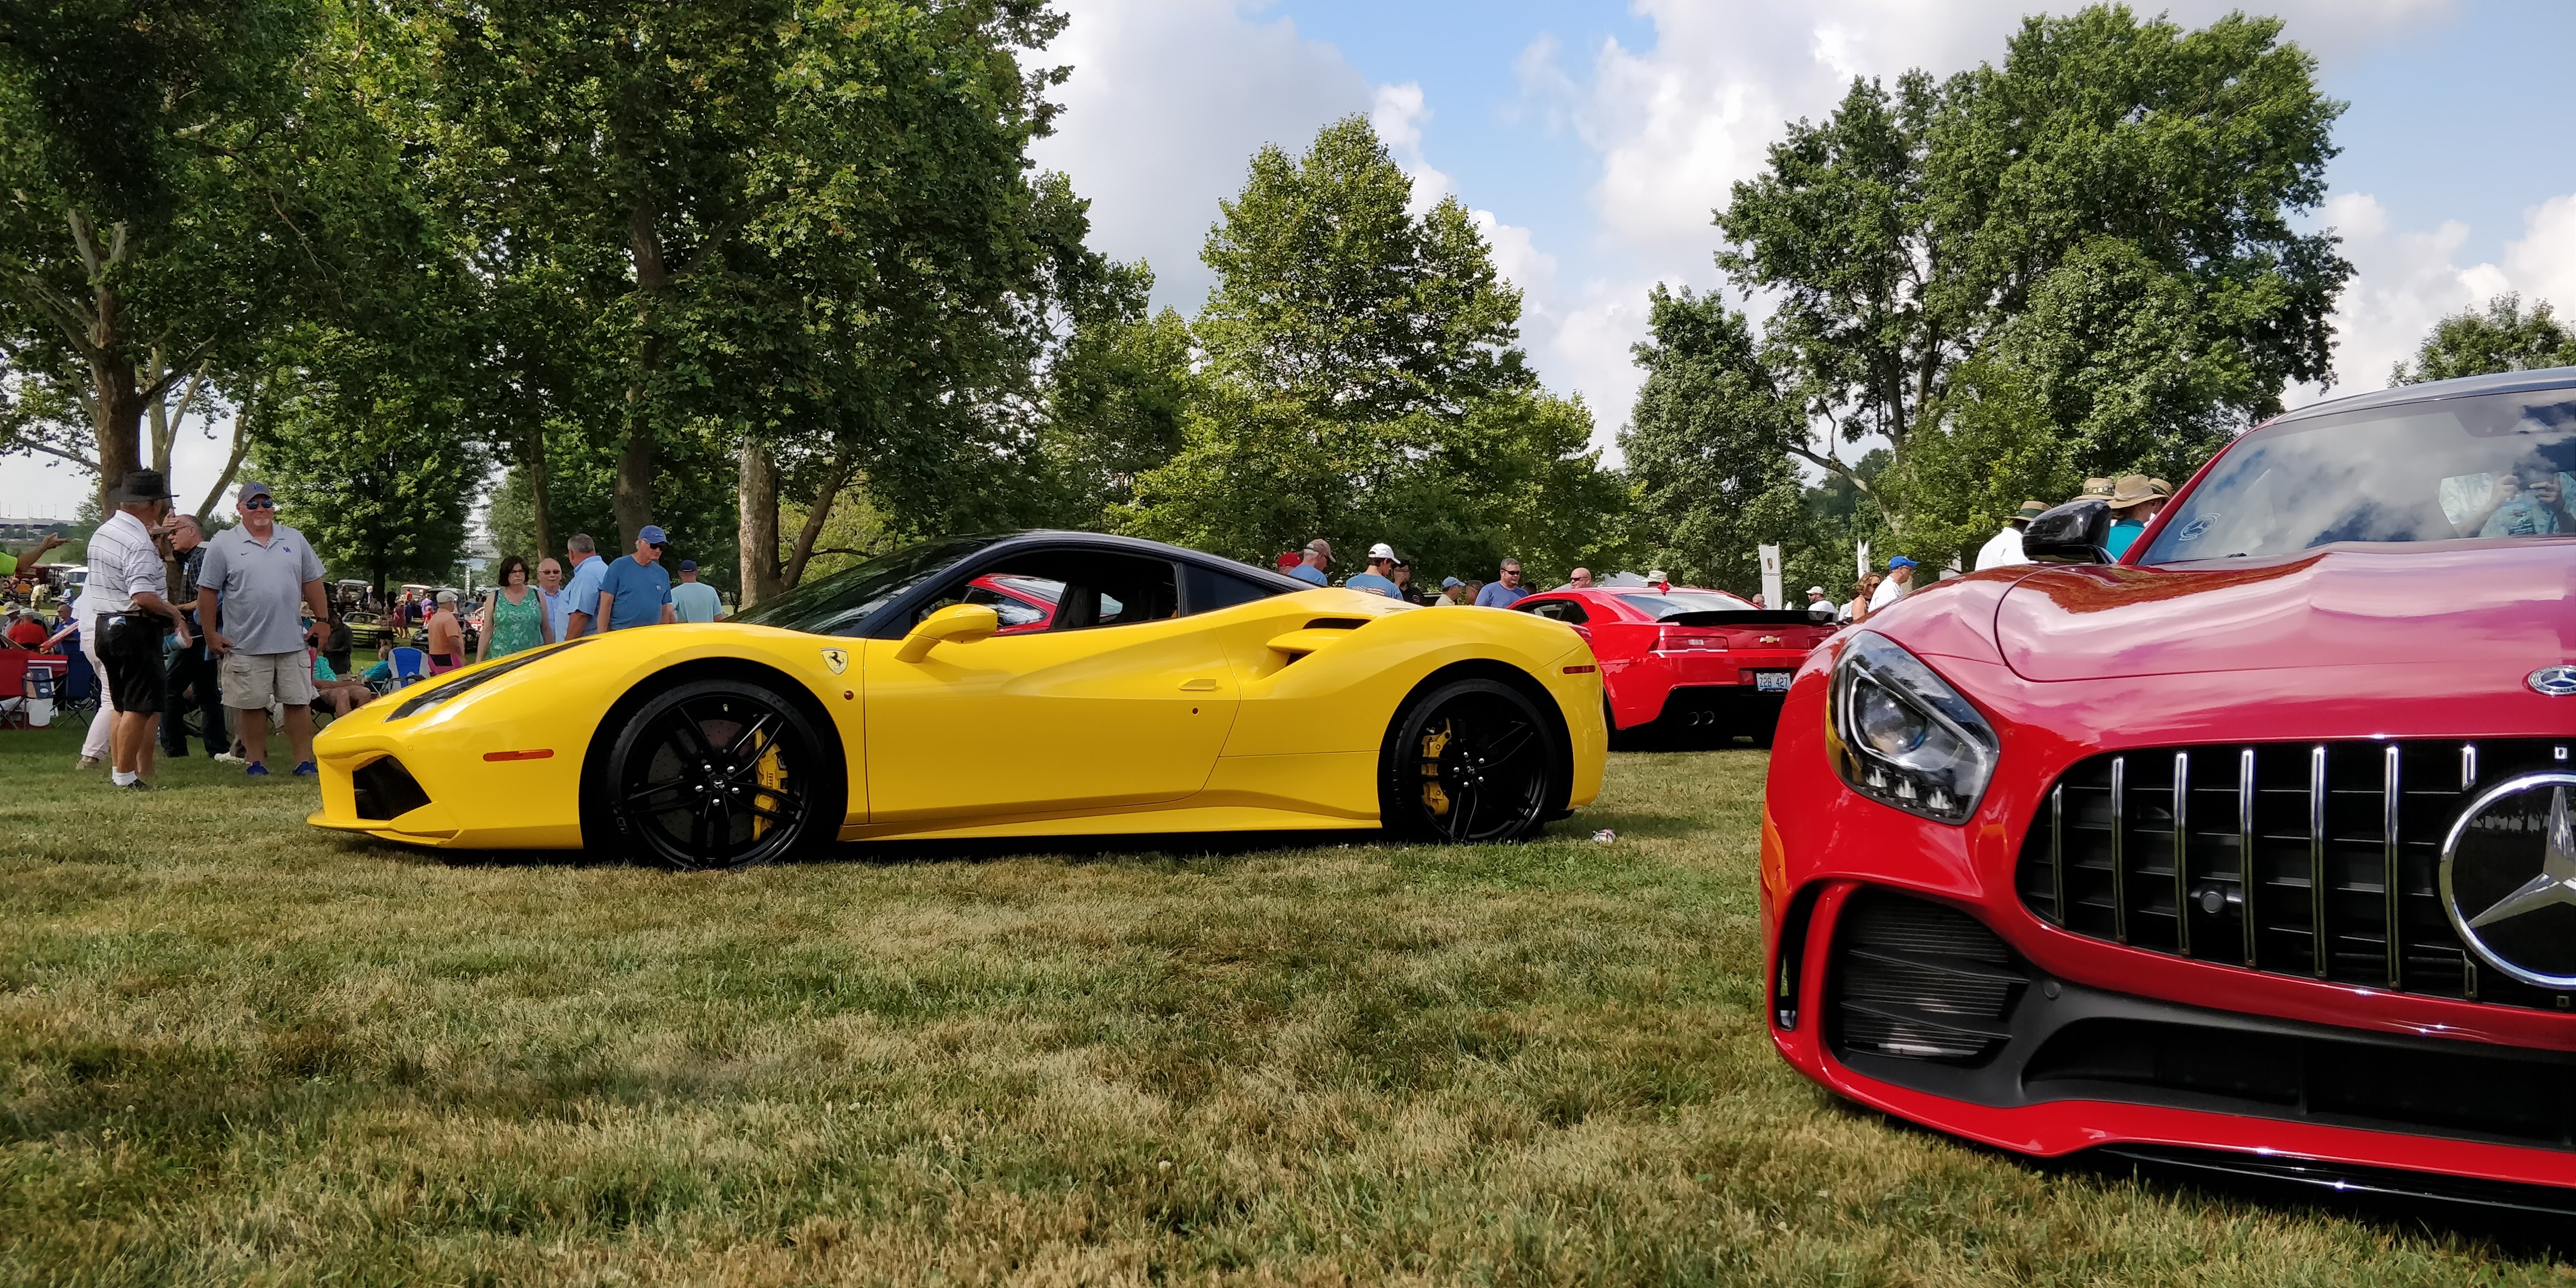 Keenland Concours 2019